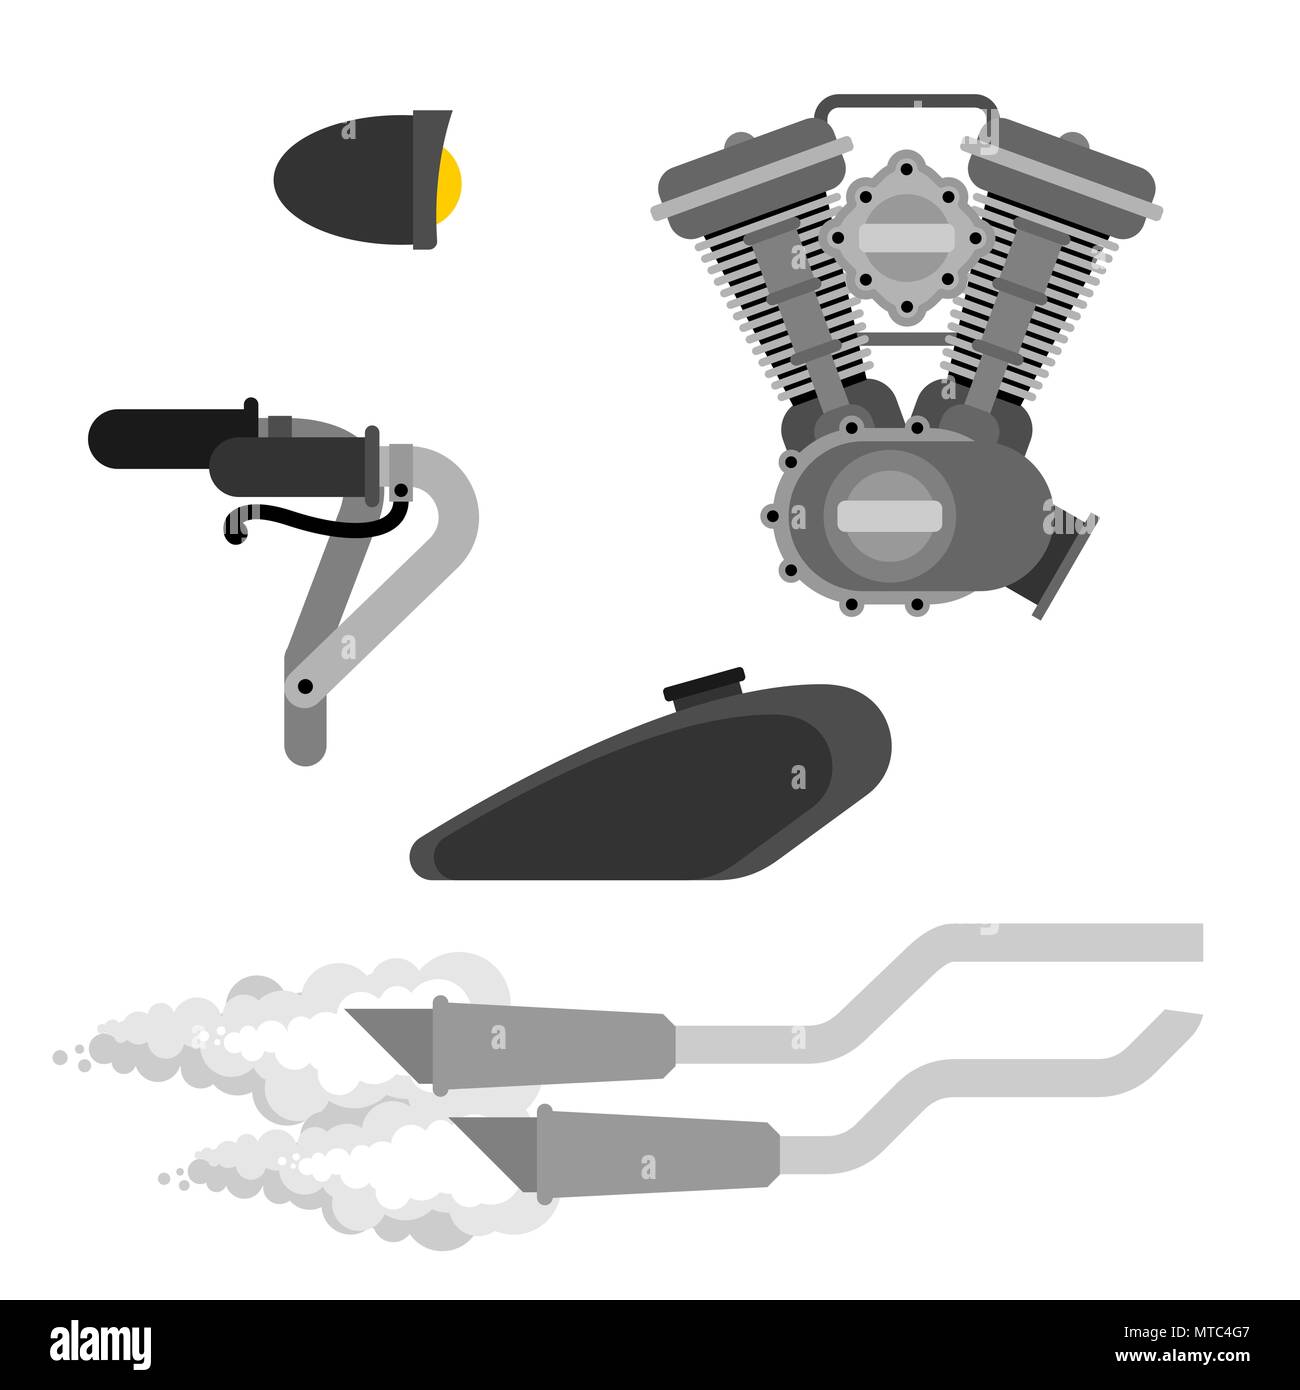 Bike Motorcycle part set. Engine racing. Exhaust pipe and Steering wheel. Fuel tank and Headlight. Vector illustration Stock Vector